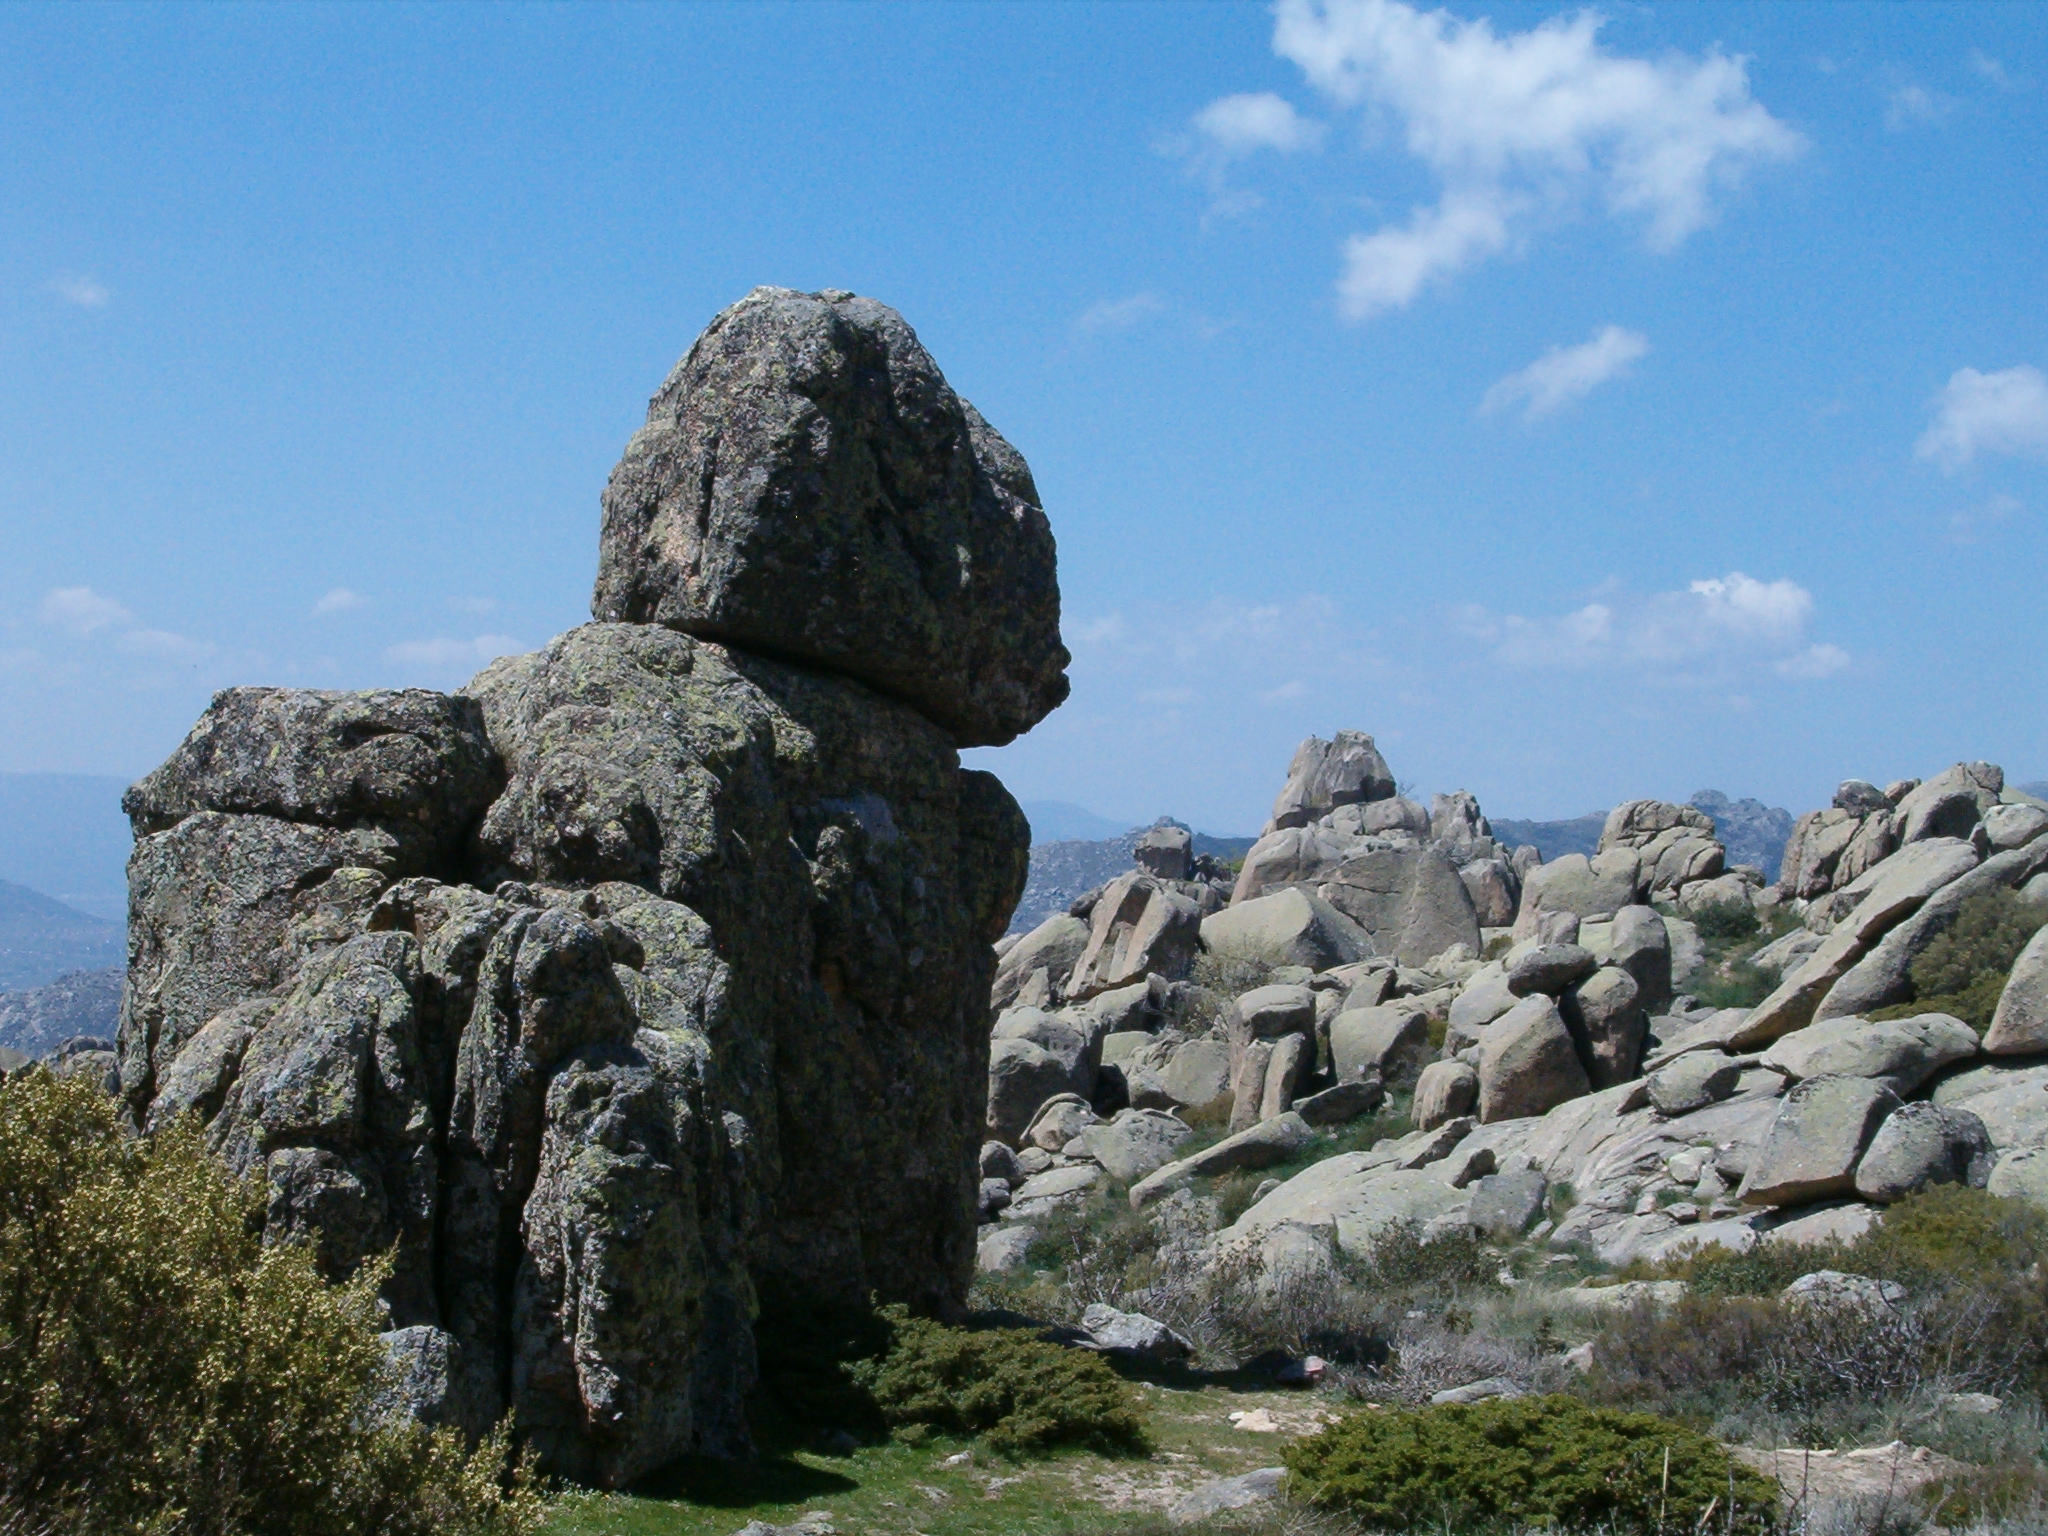 the giant rocks are standing on the mountain top